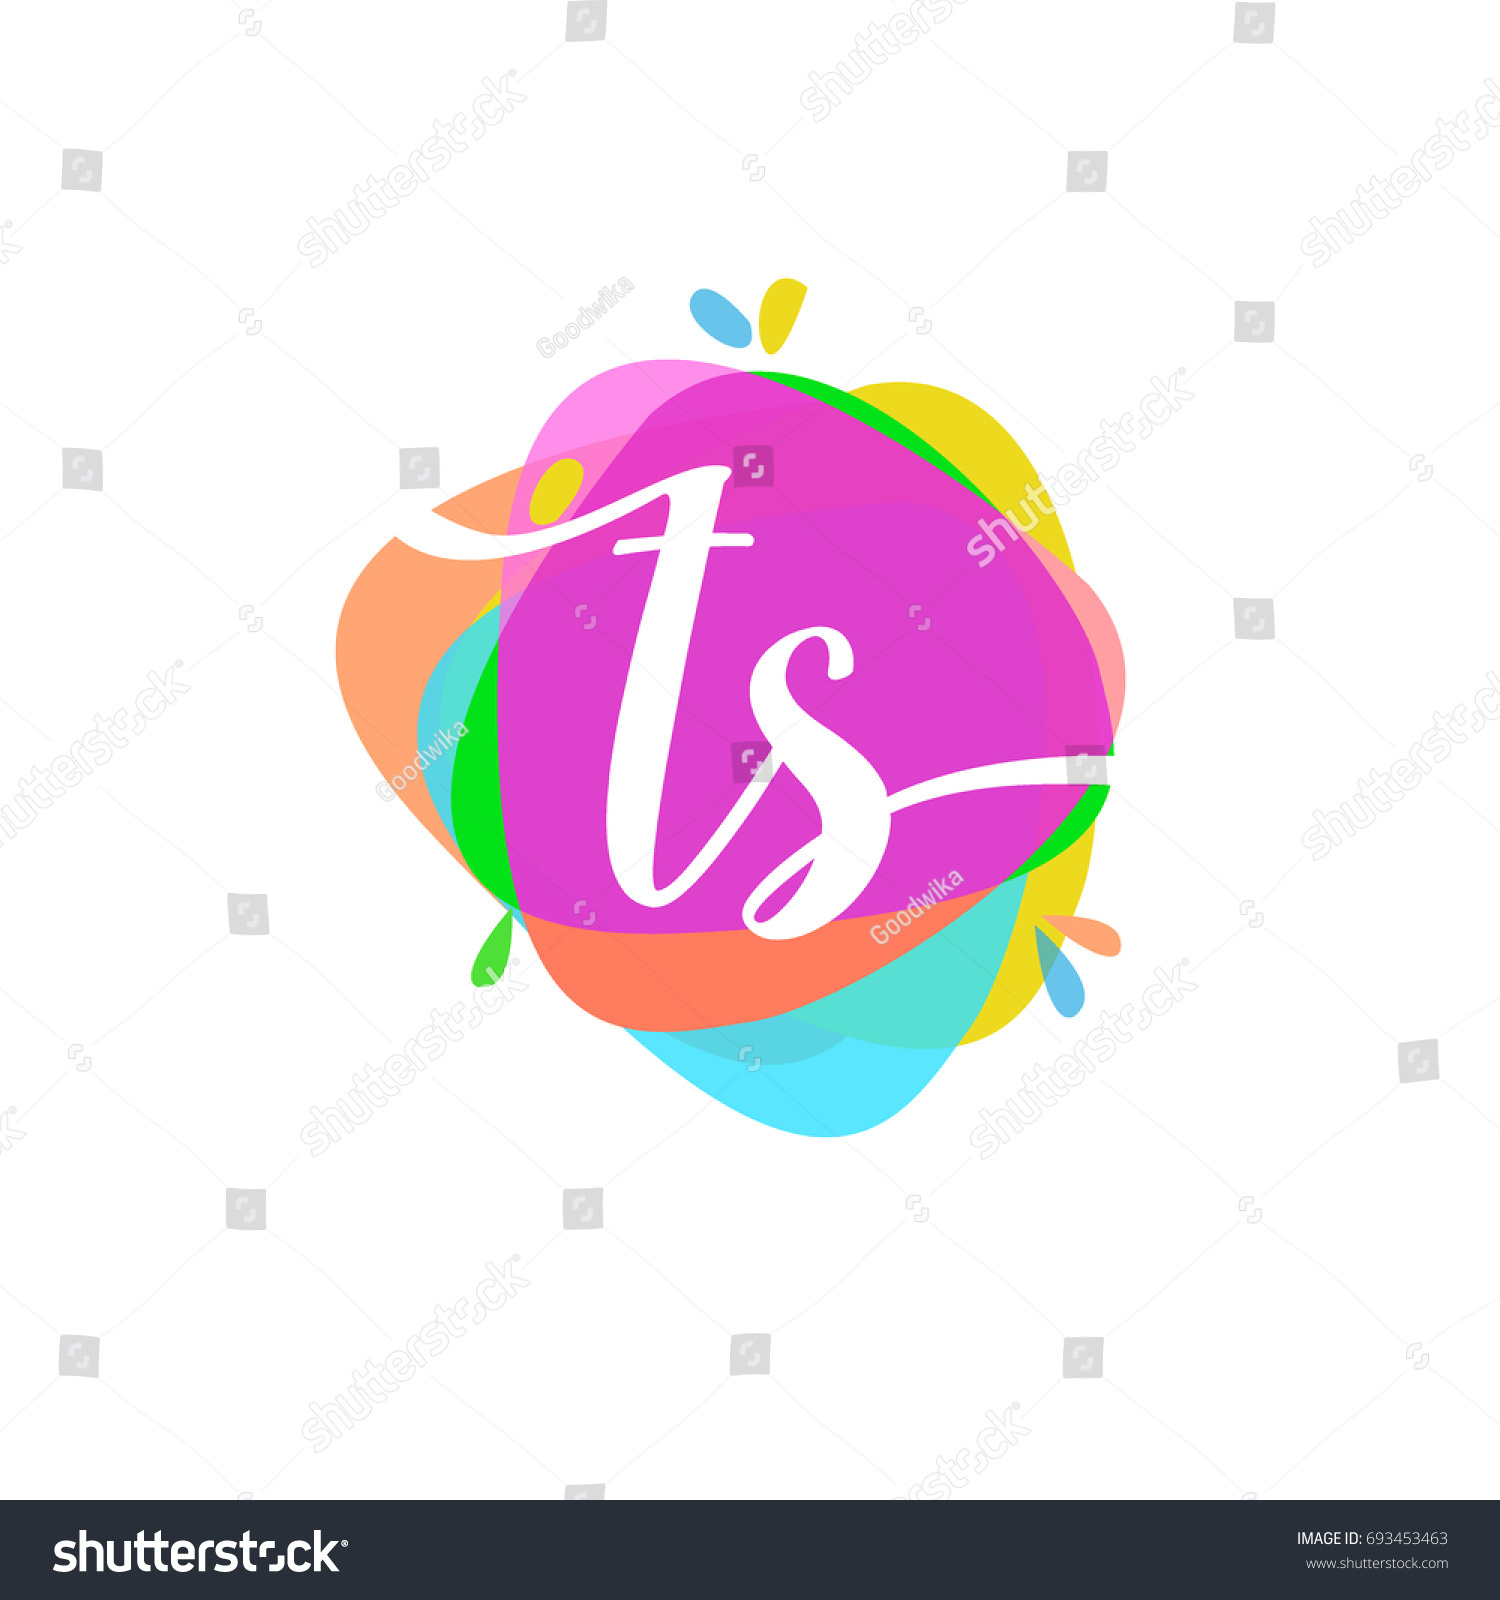 Letter Ts Logo Colorful Splash Background Stock Vector (Royalty Free ...